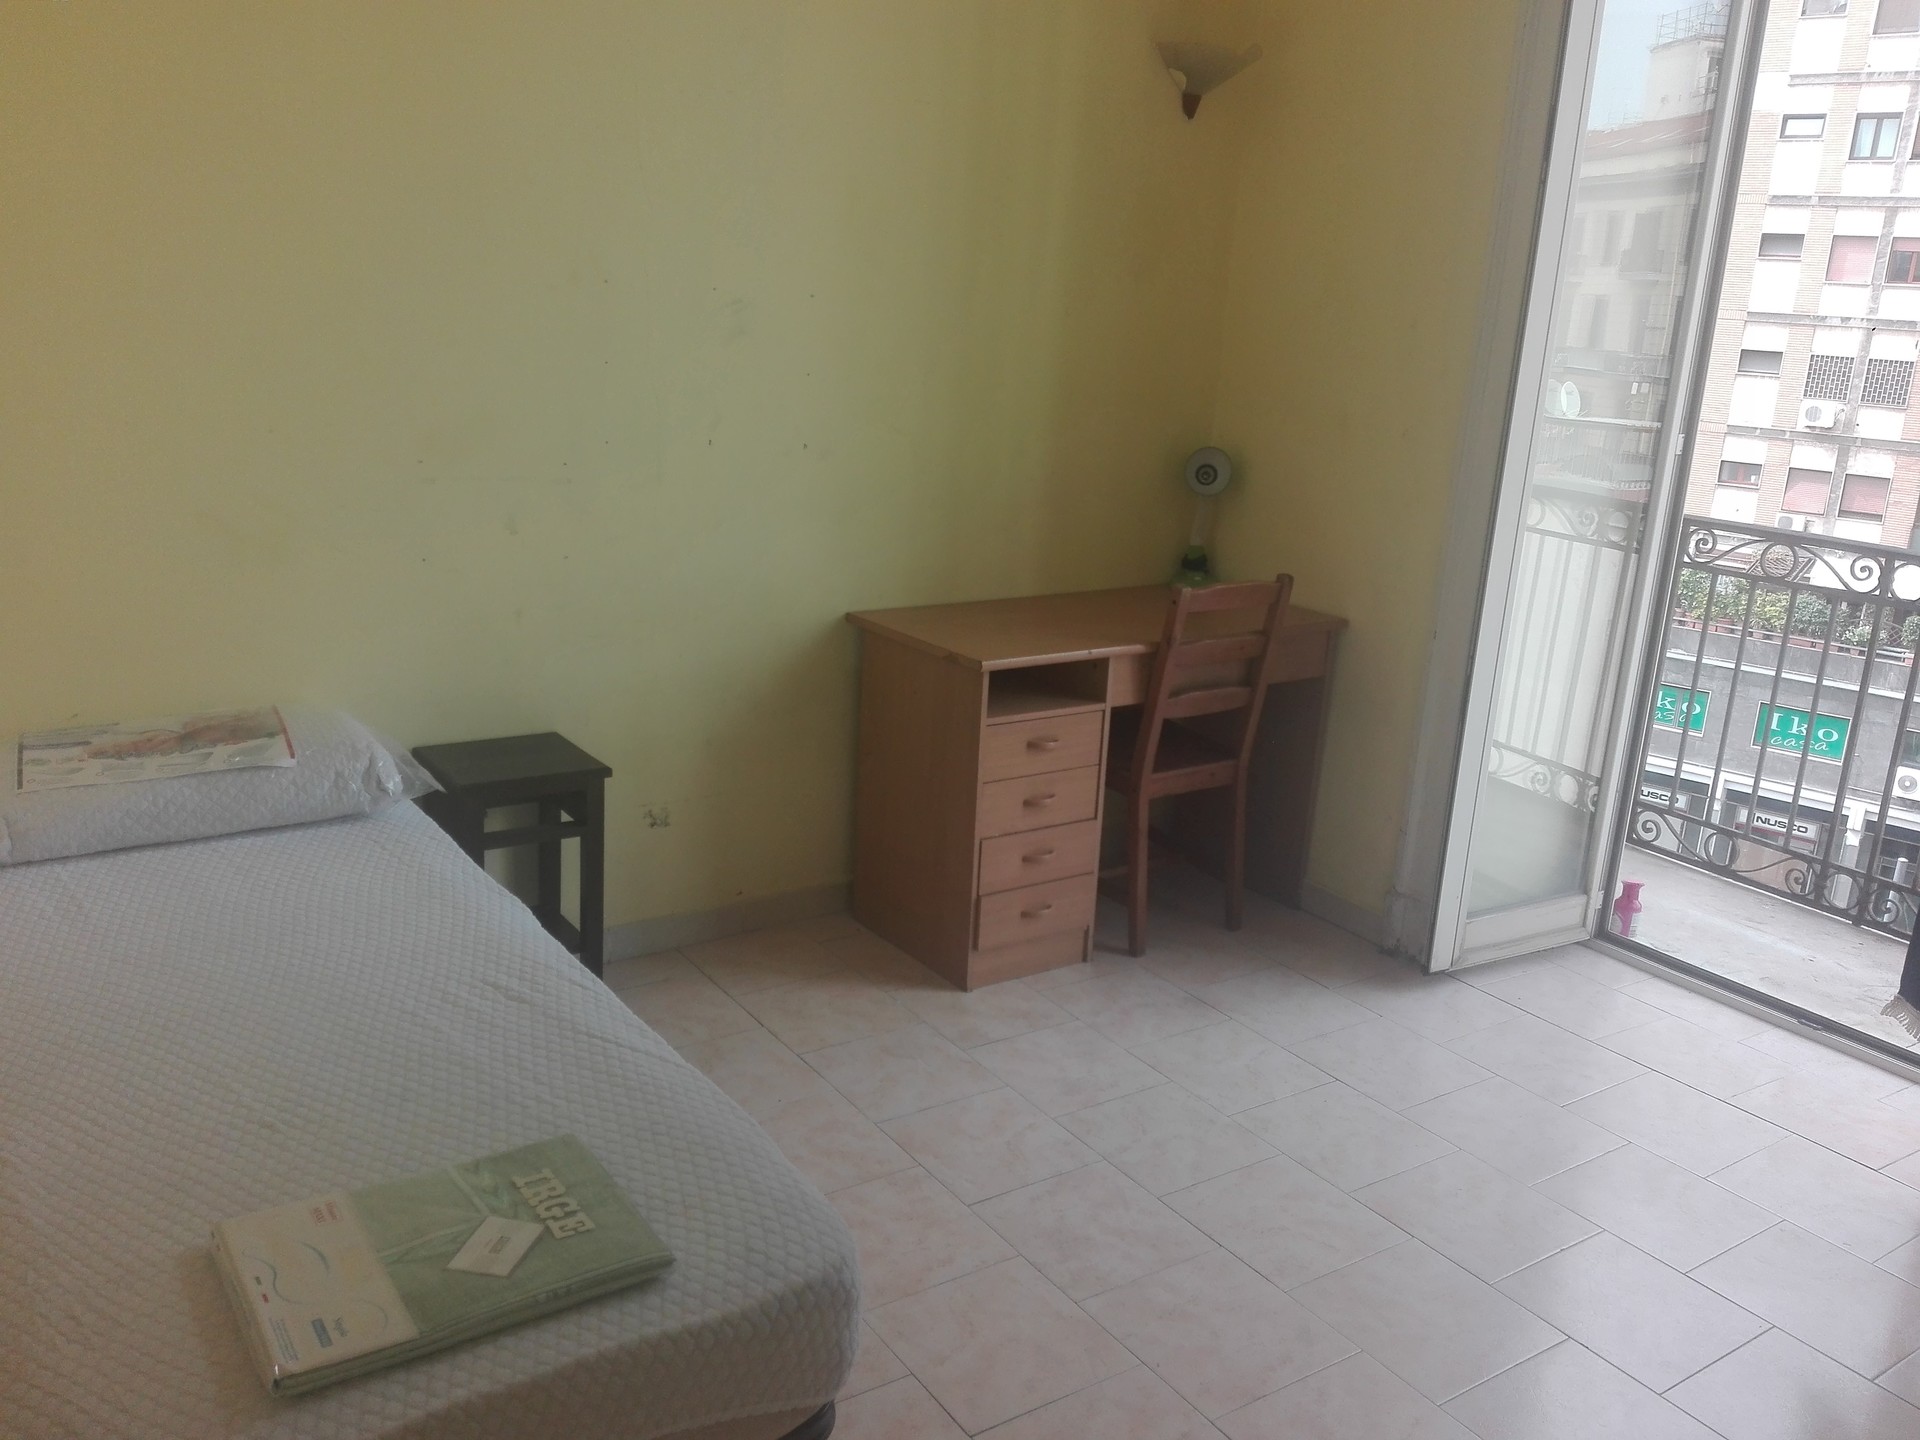 Spare Student Bedroom For Rent In Naples With Internet And With